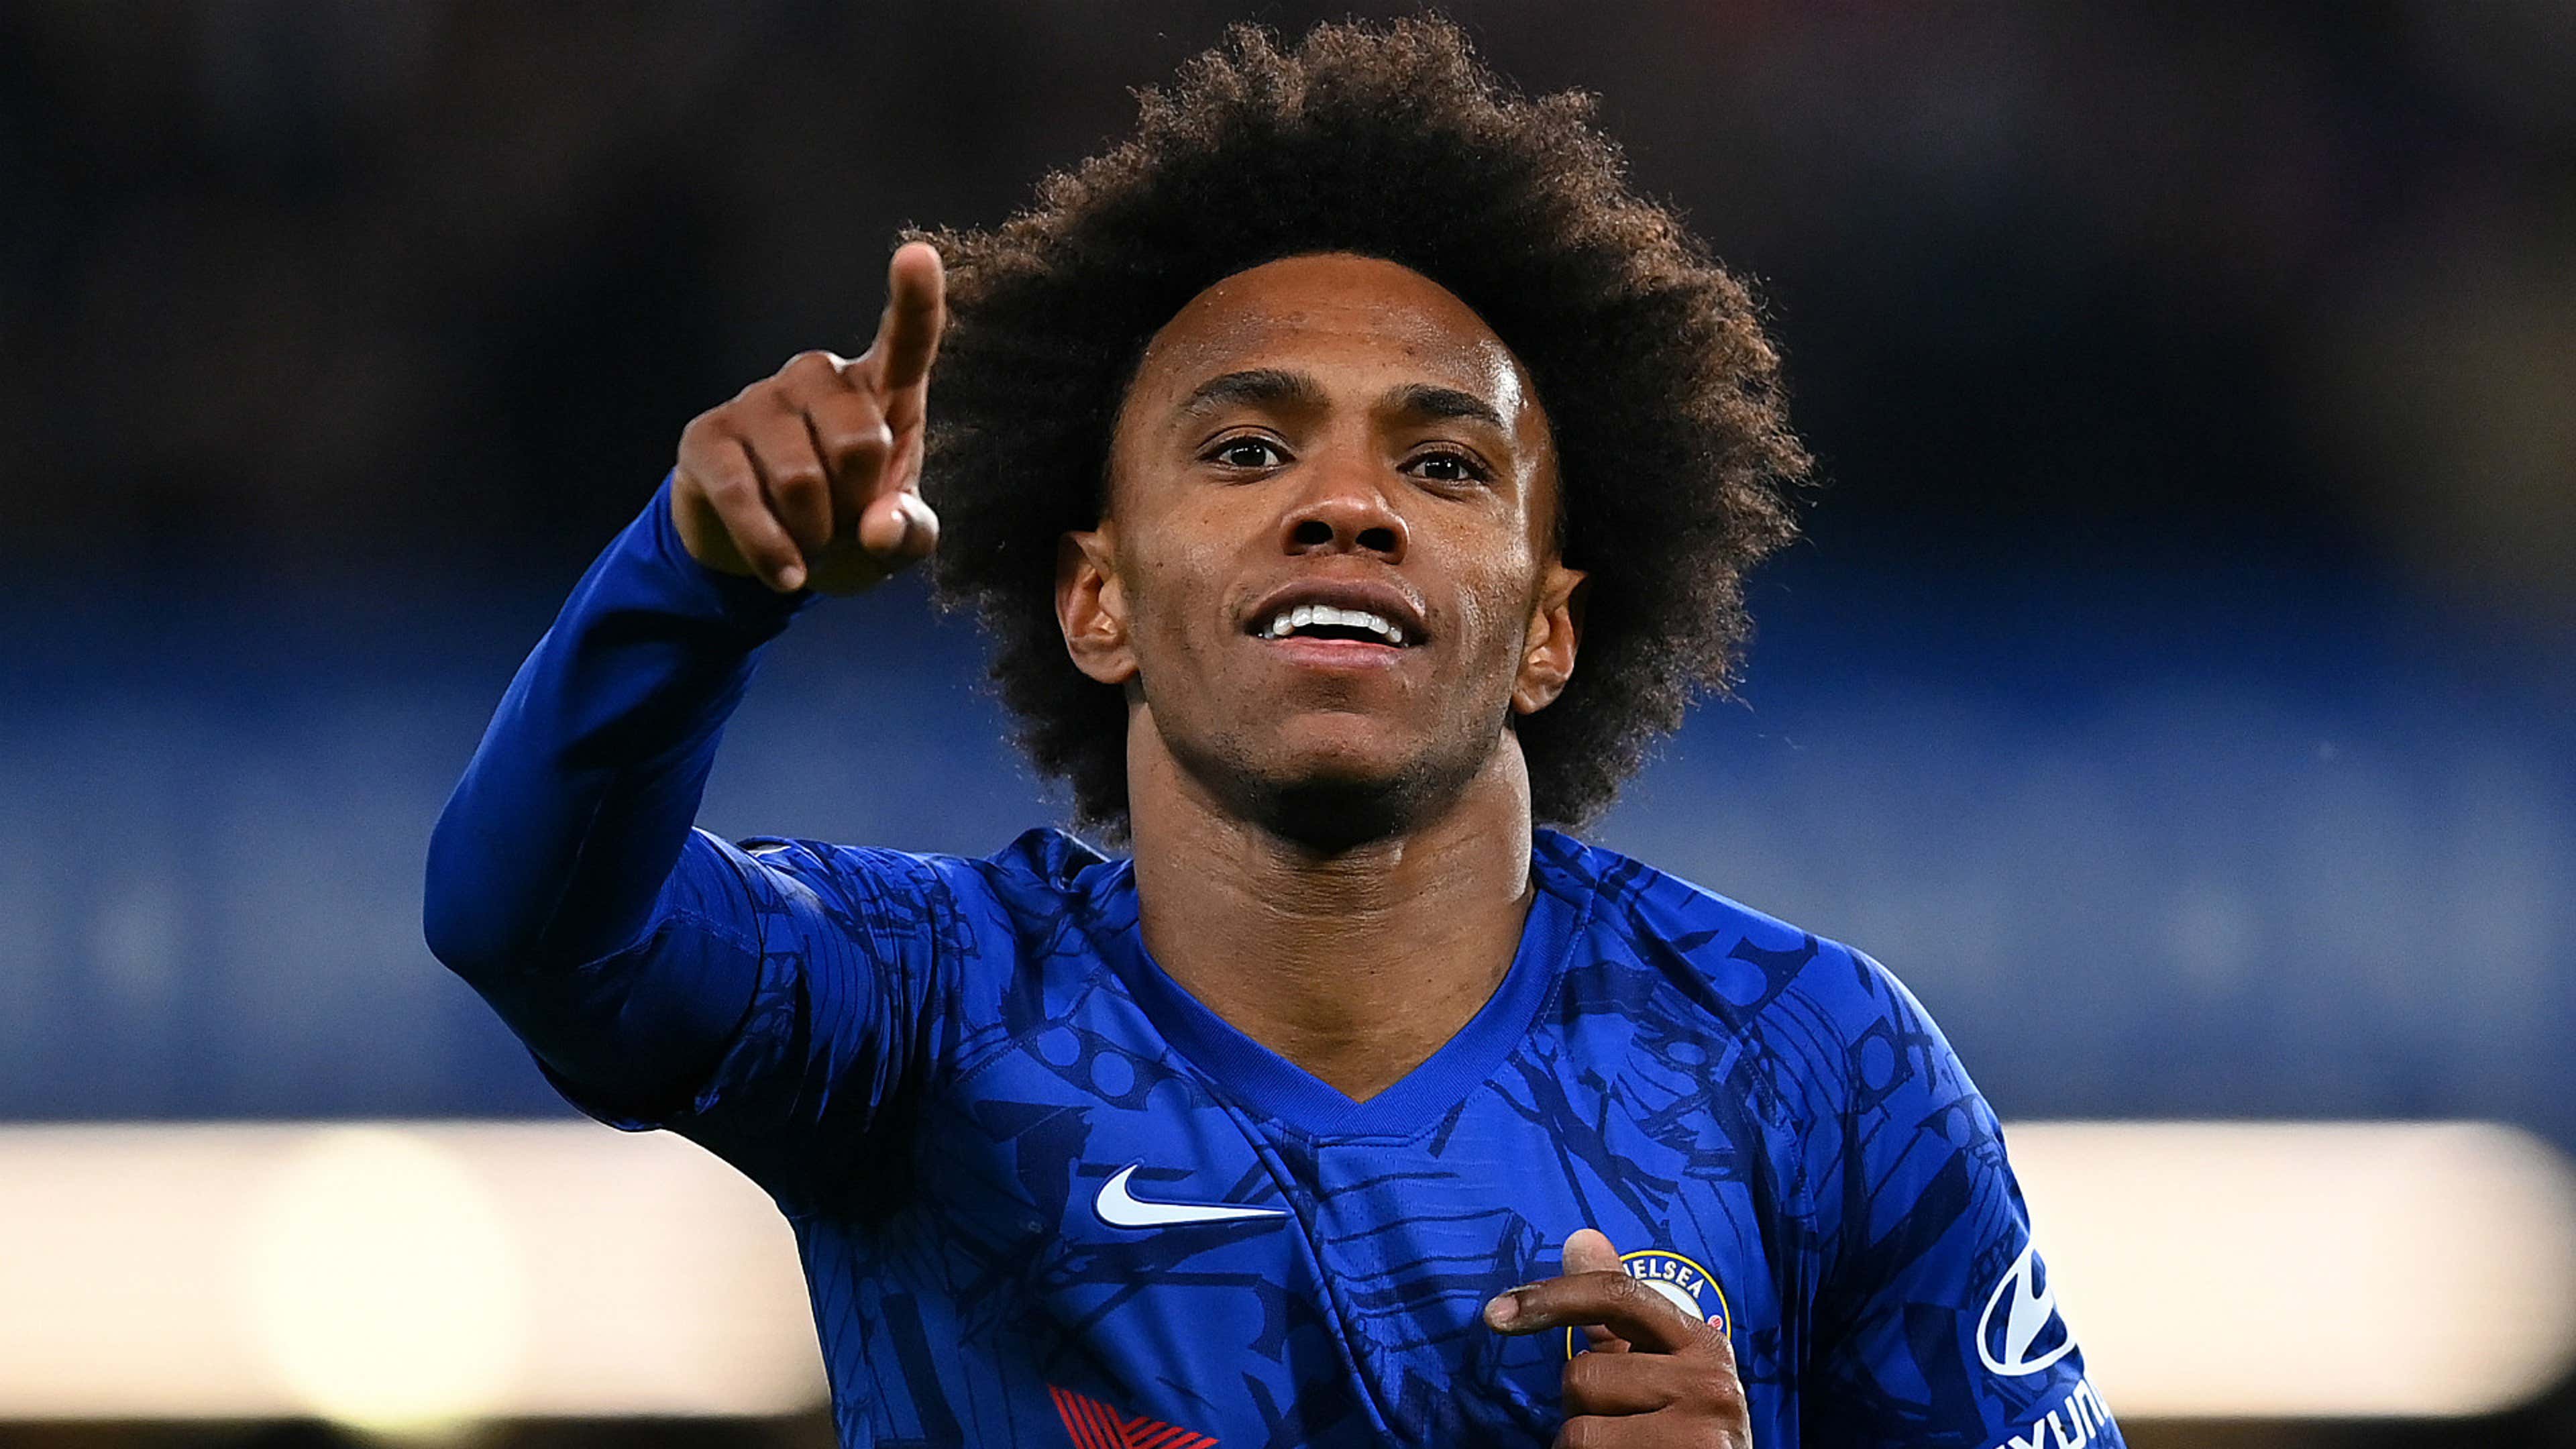 Arsenal confirm signing of ex-Chelsea winger Willian | Goal.com